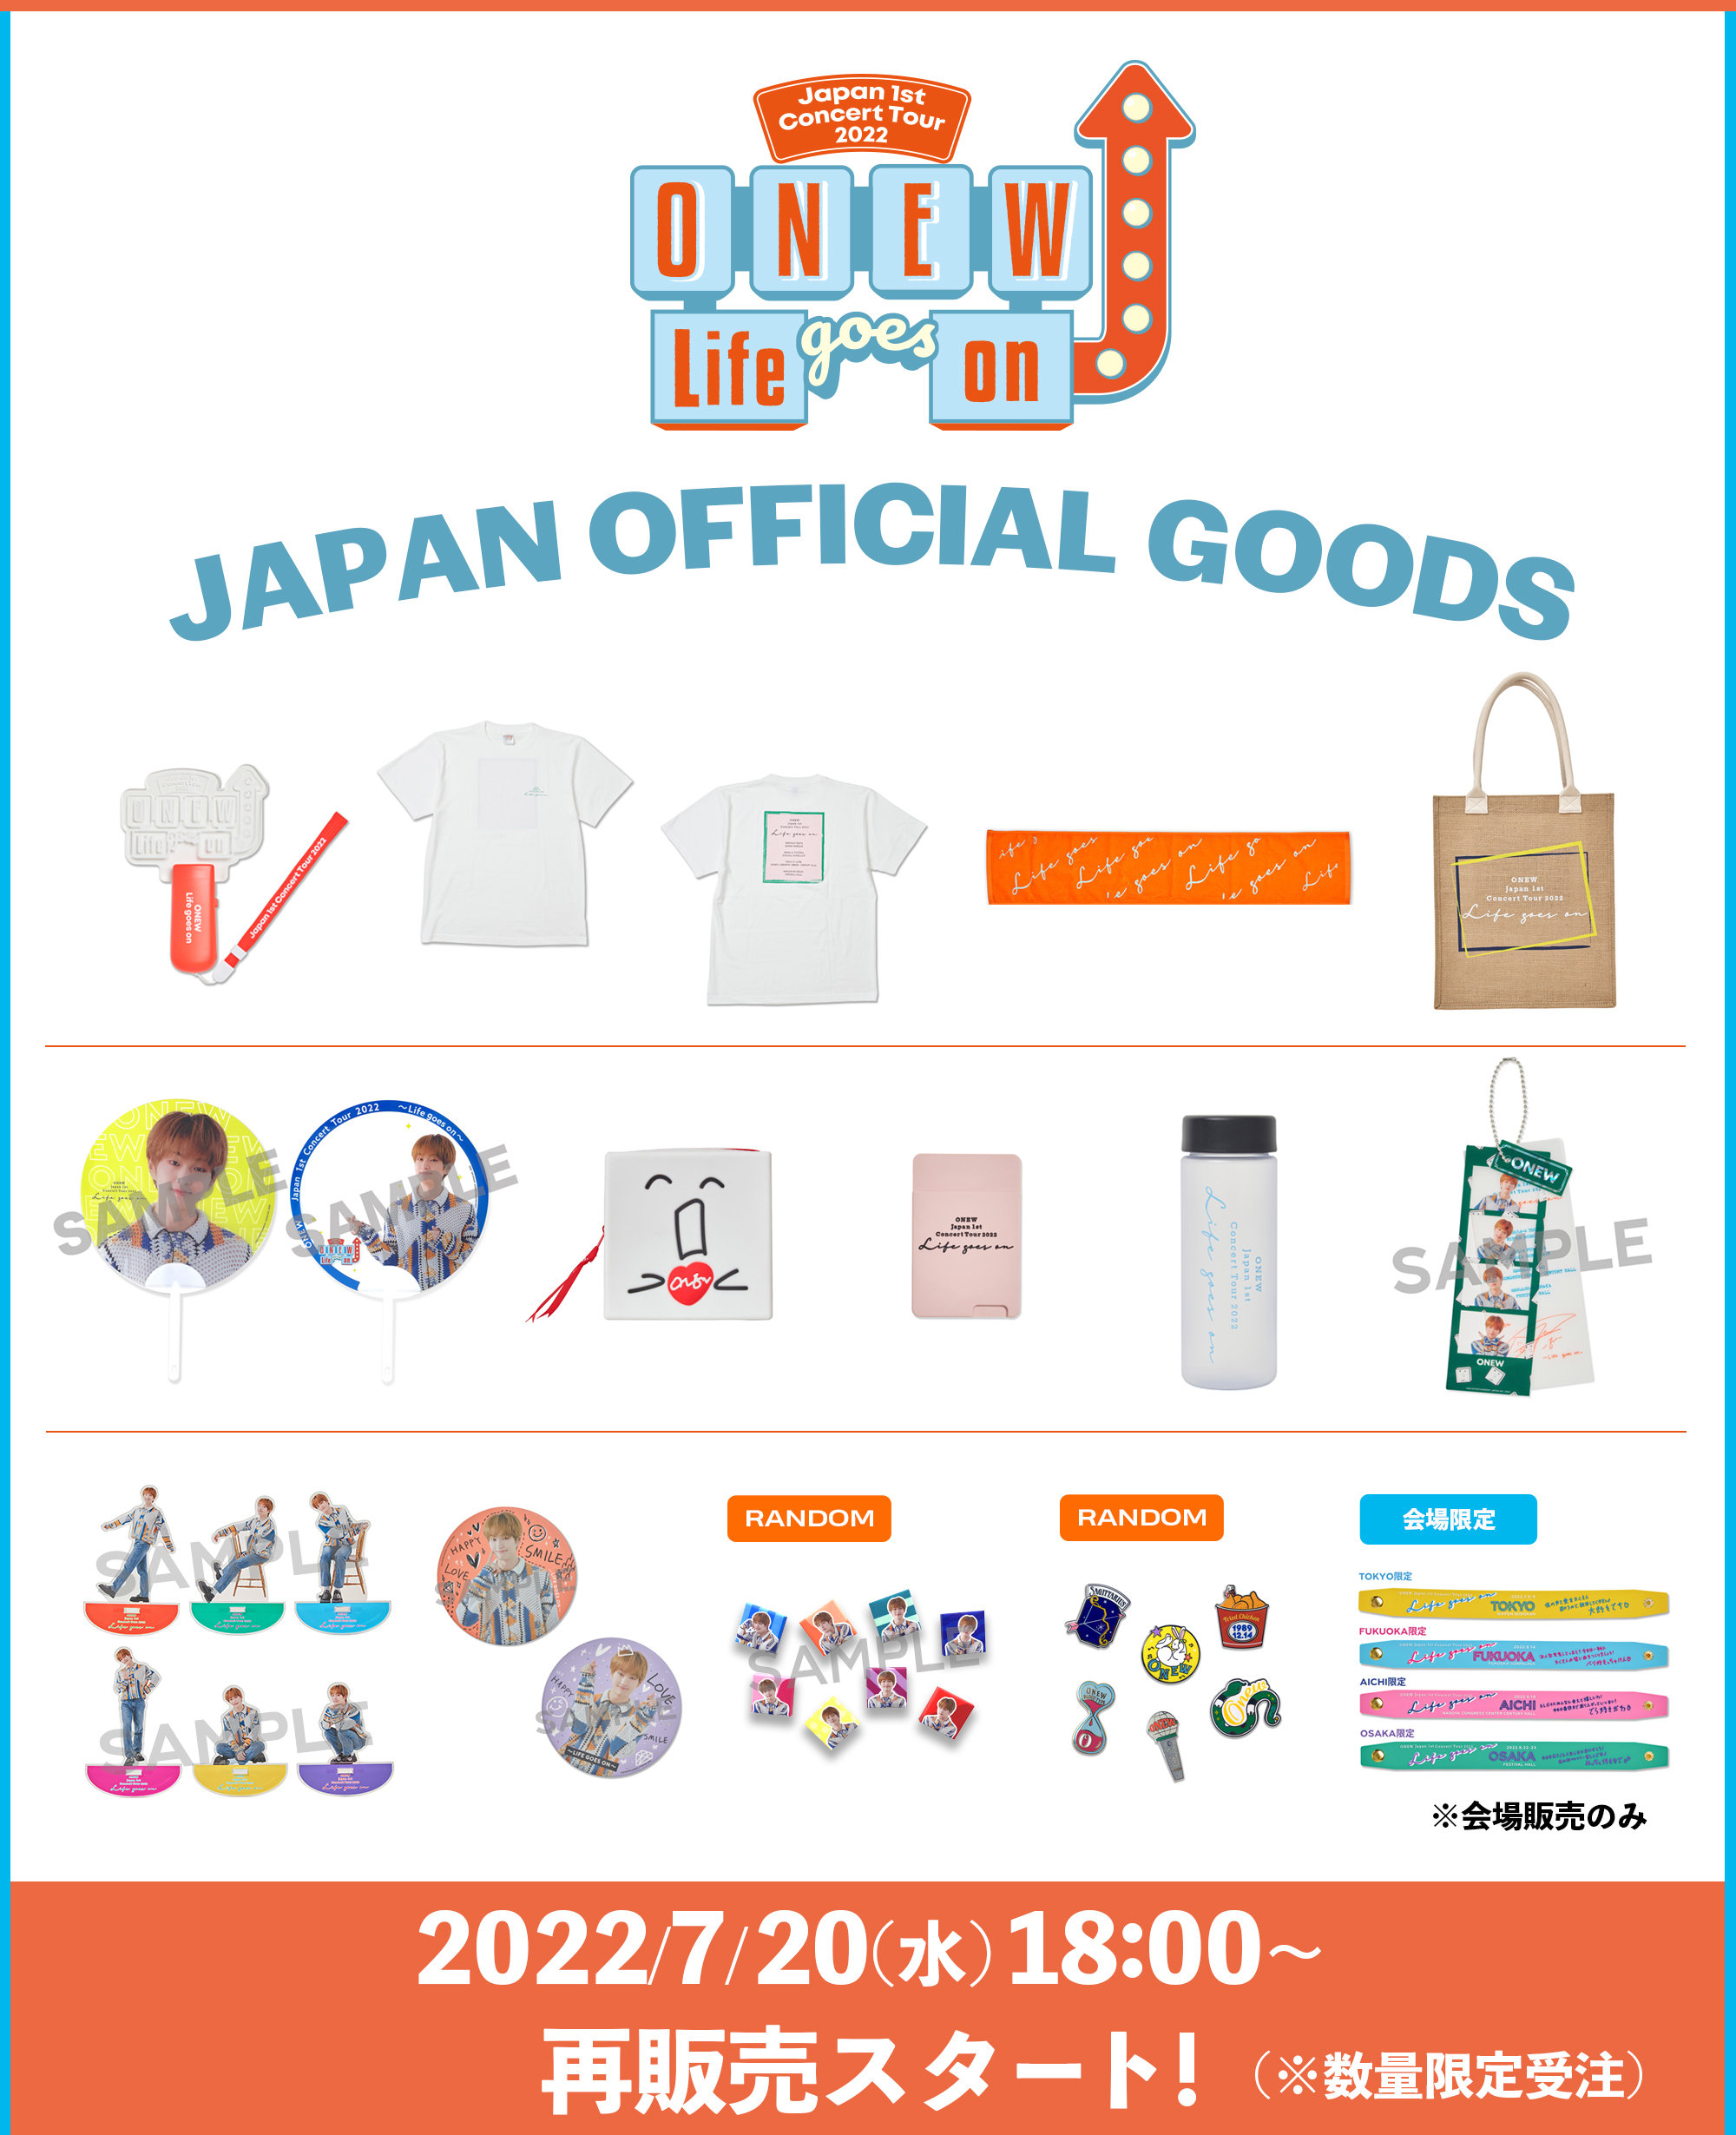 ONEW Japan 1st Concert Tour 2022 ～Life goes on～」グッズ追加受注 